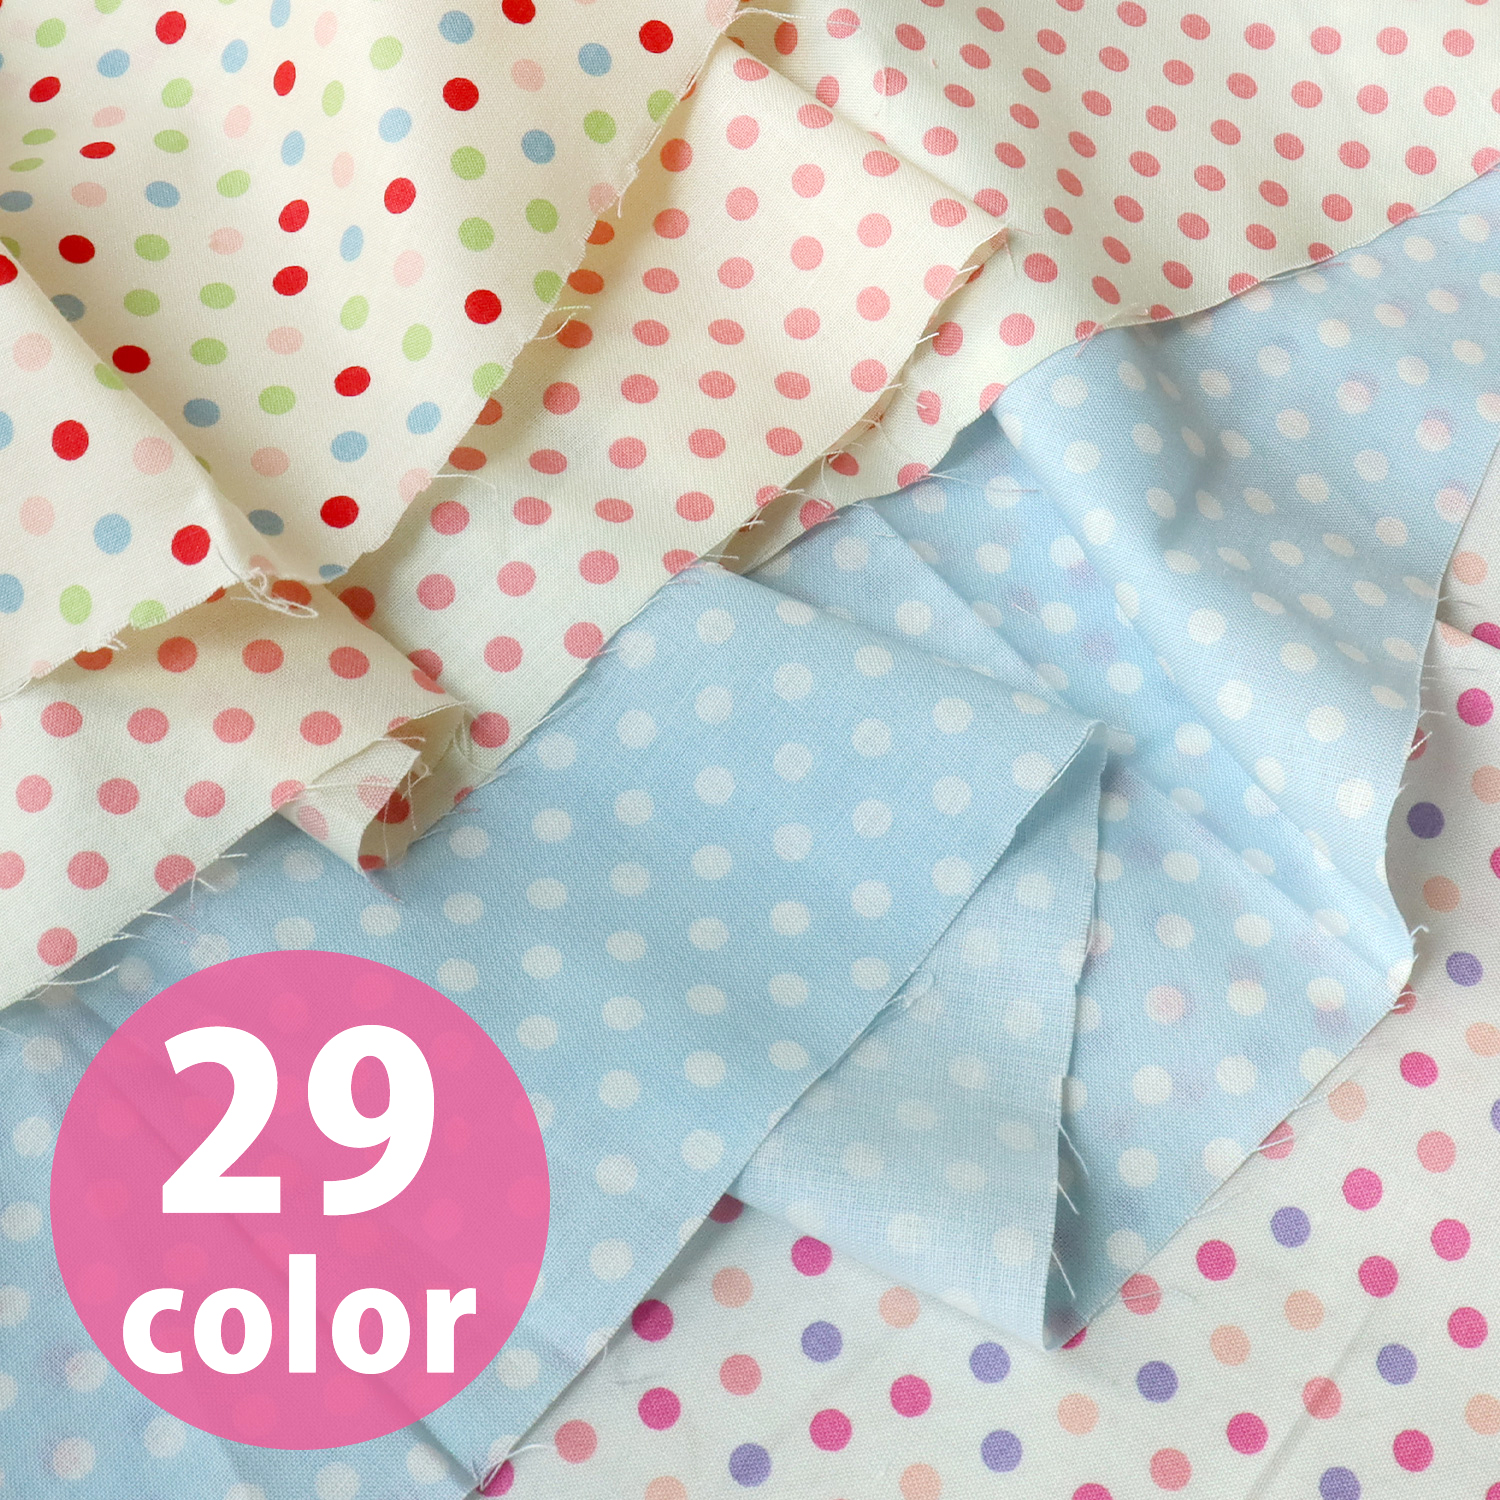 HS1284 Happy Sweet Collection, Dot Scare Print Fabric, Width approx.110cm 1m/unit (m)